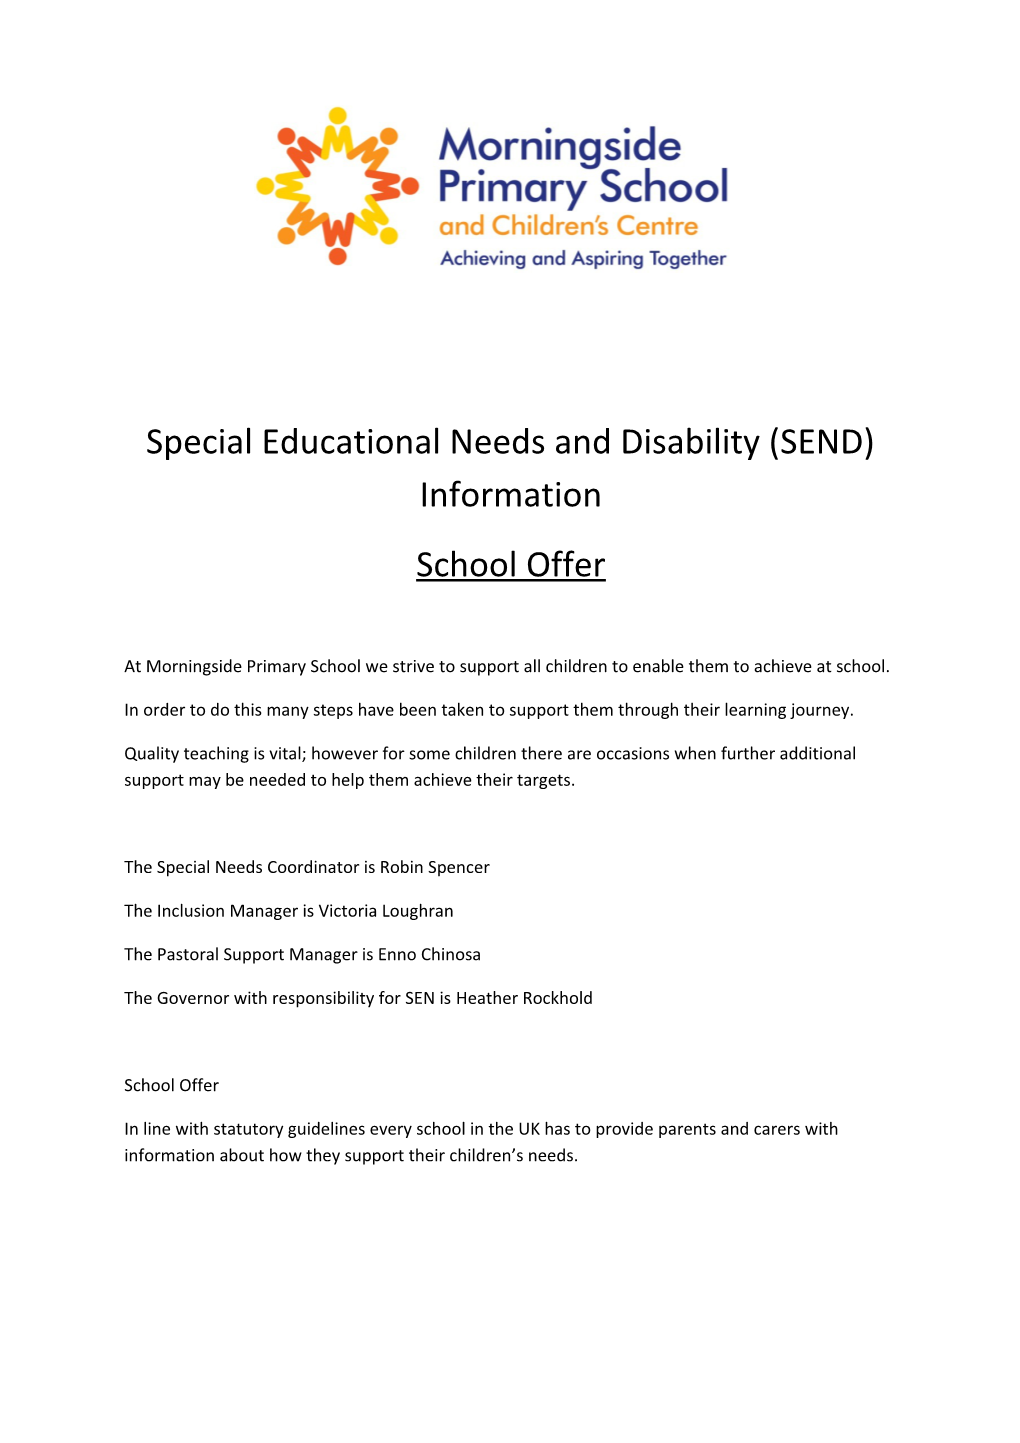 Special Educational Needs and Disability(SEND) Information